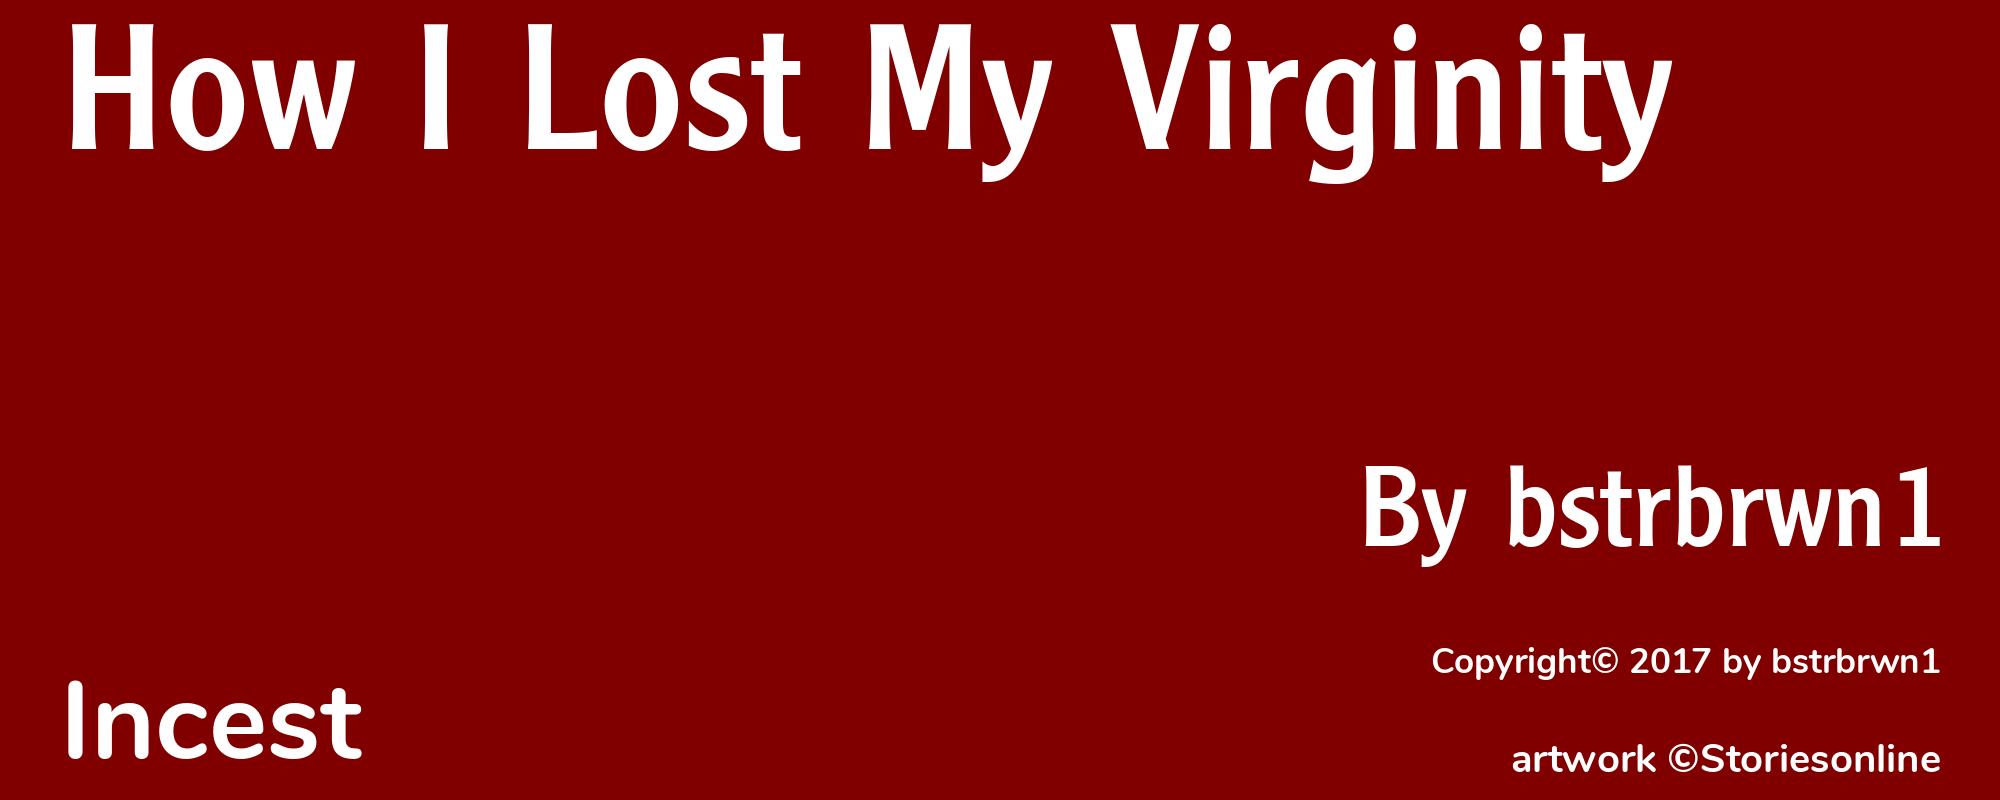 How I Lost My Virginity - Cover